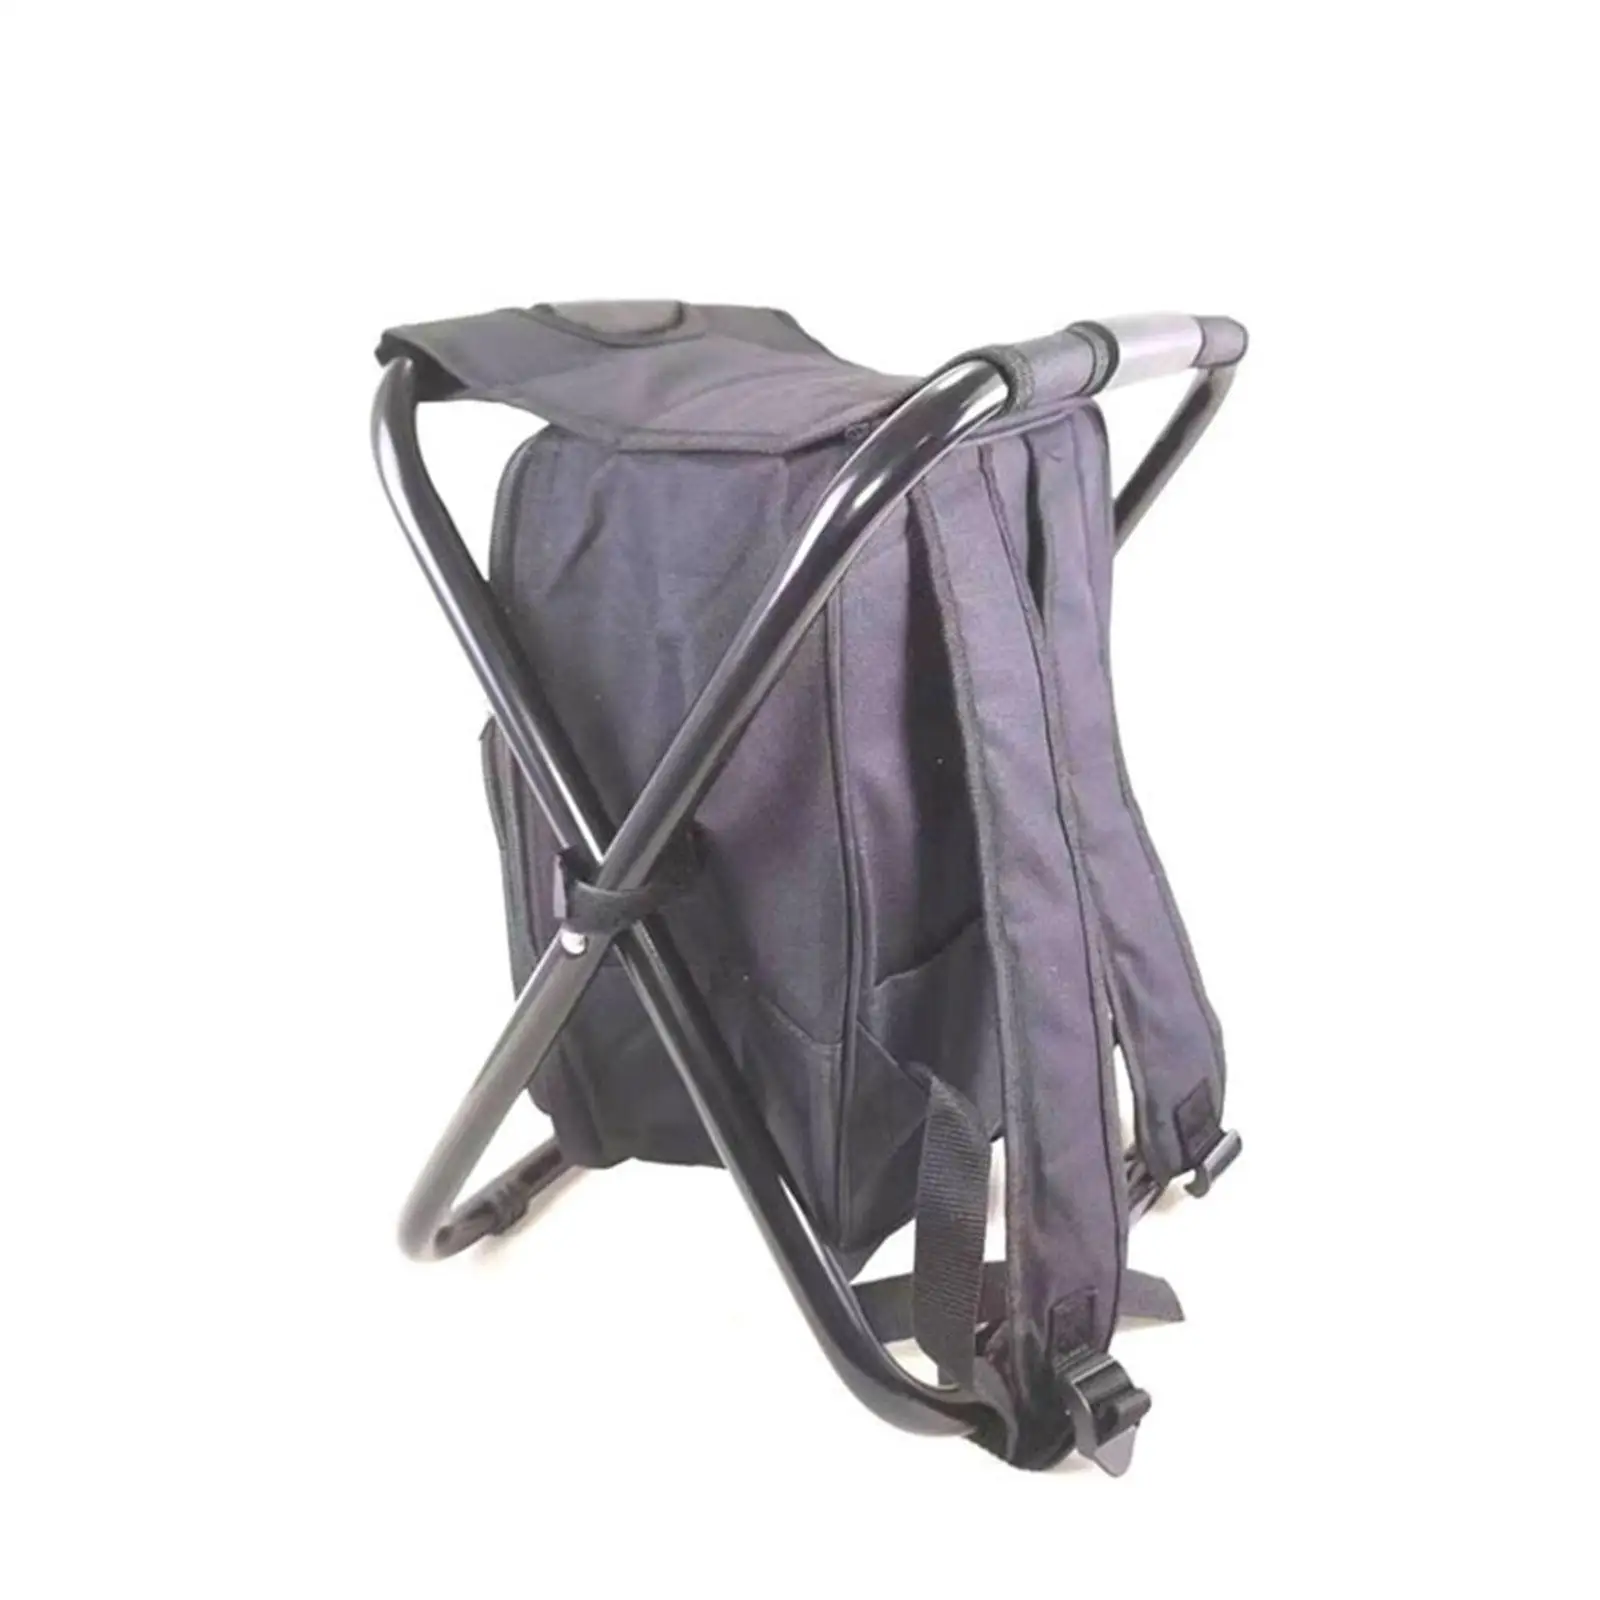 Backpack Chairs for Adults Lightweight Camping Chair for Camping Travel